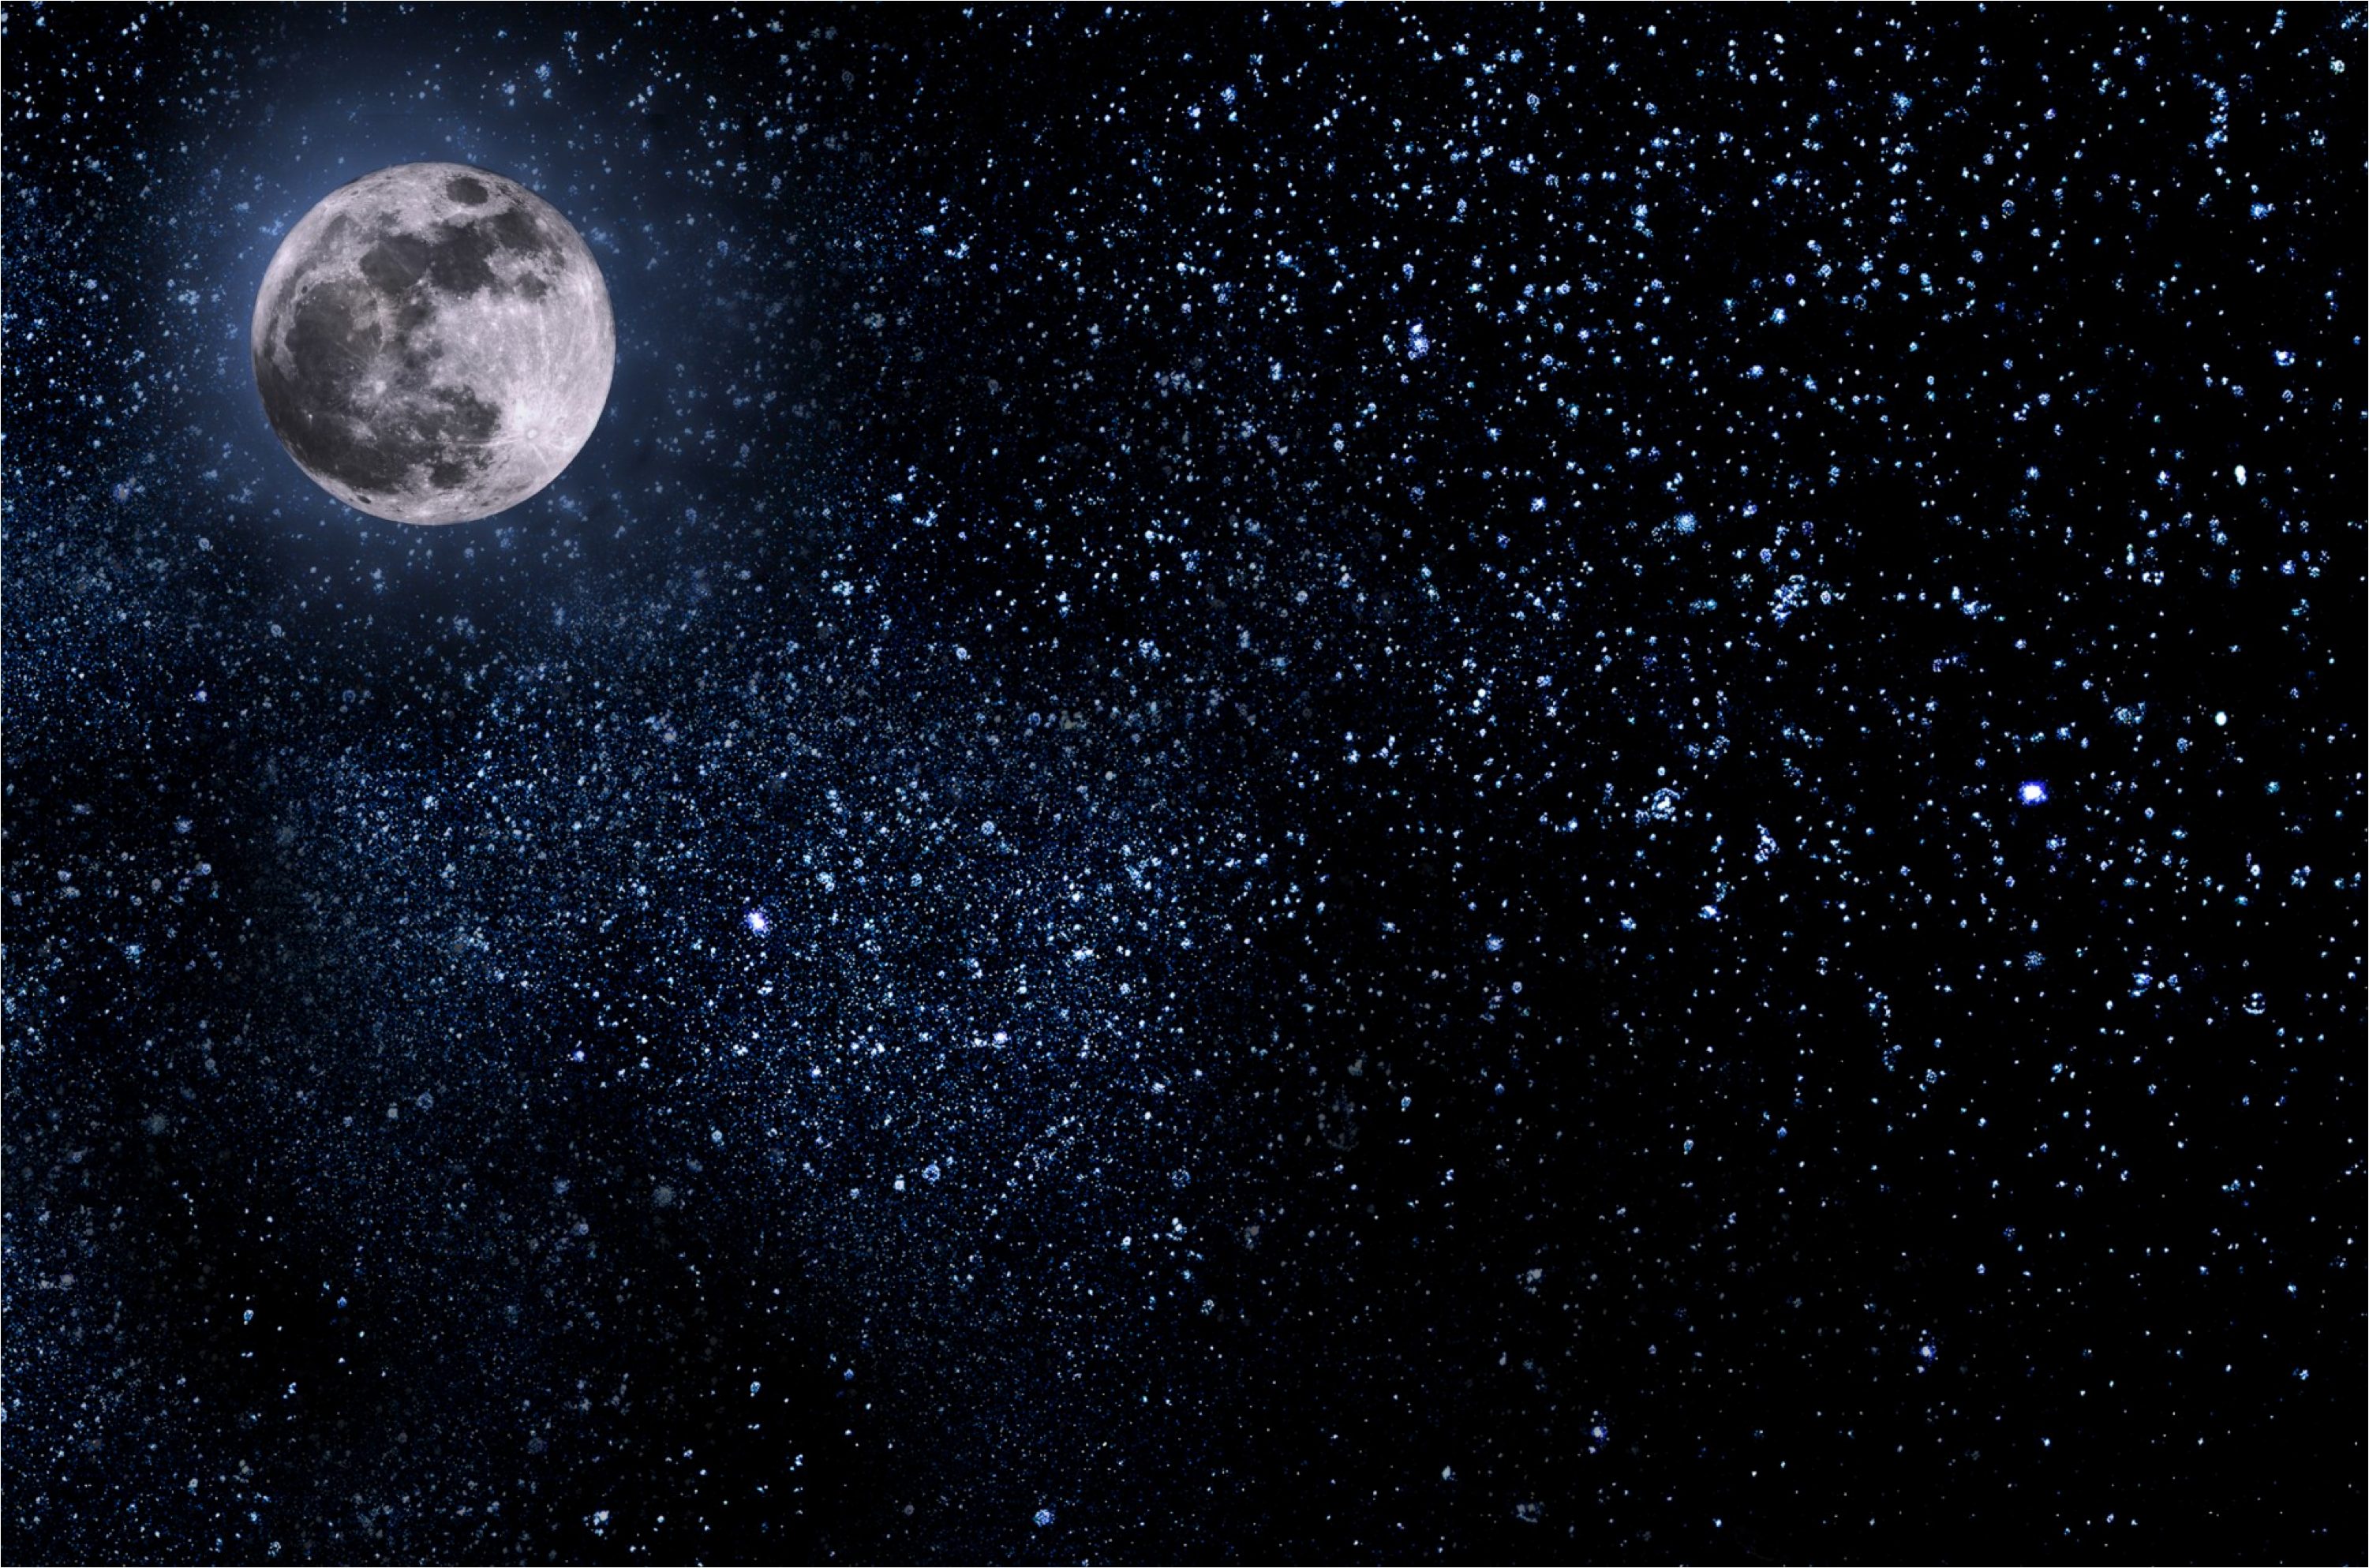 A picture of the moon in a starry sky.